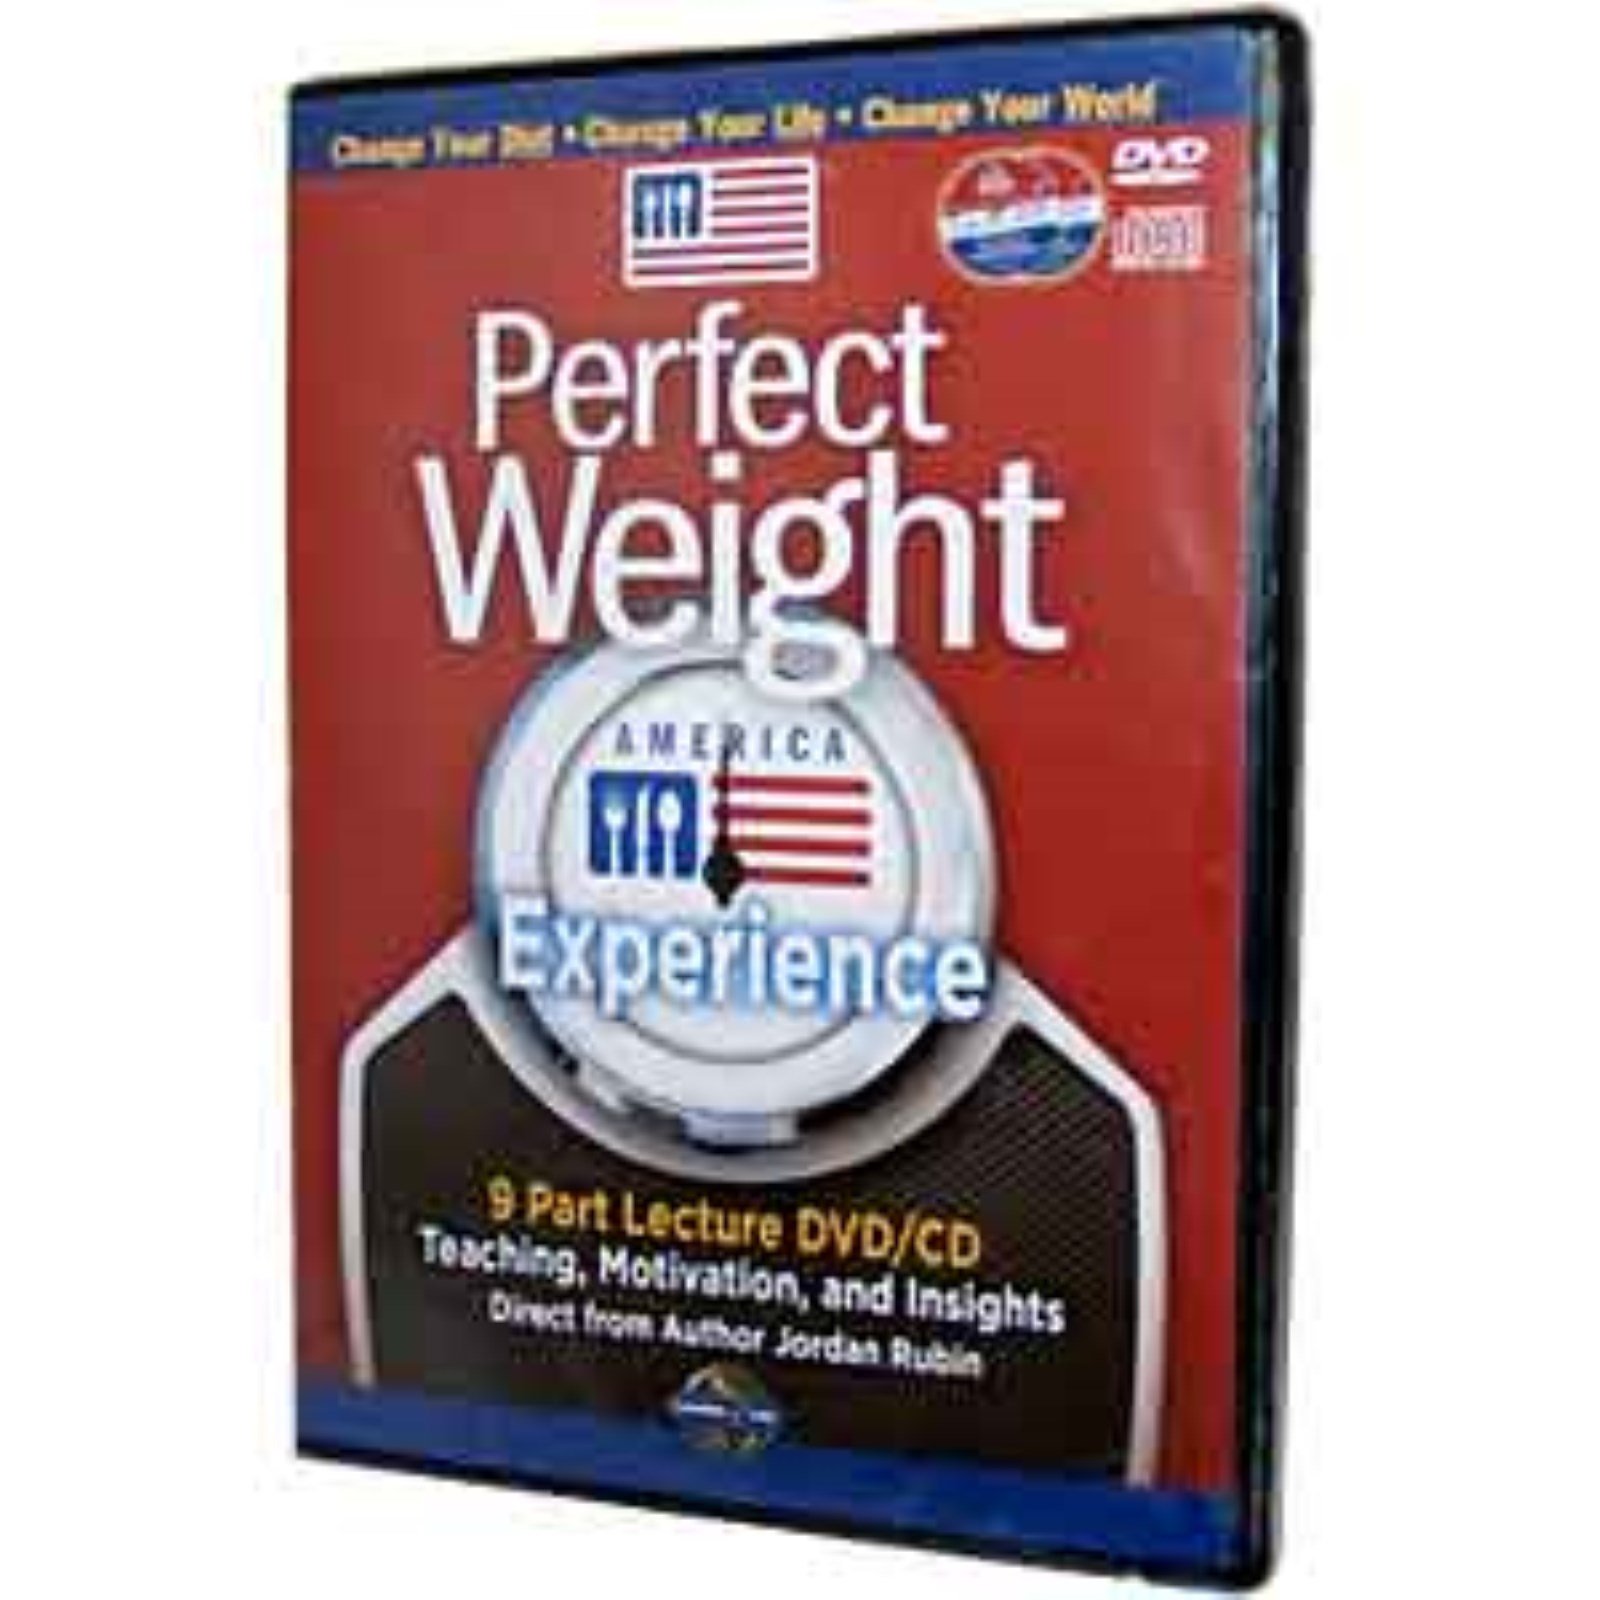 Garden Of Life Perfect Weight America Experience 2 Disc Dvd Cd